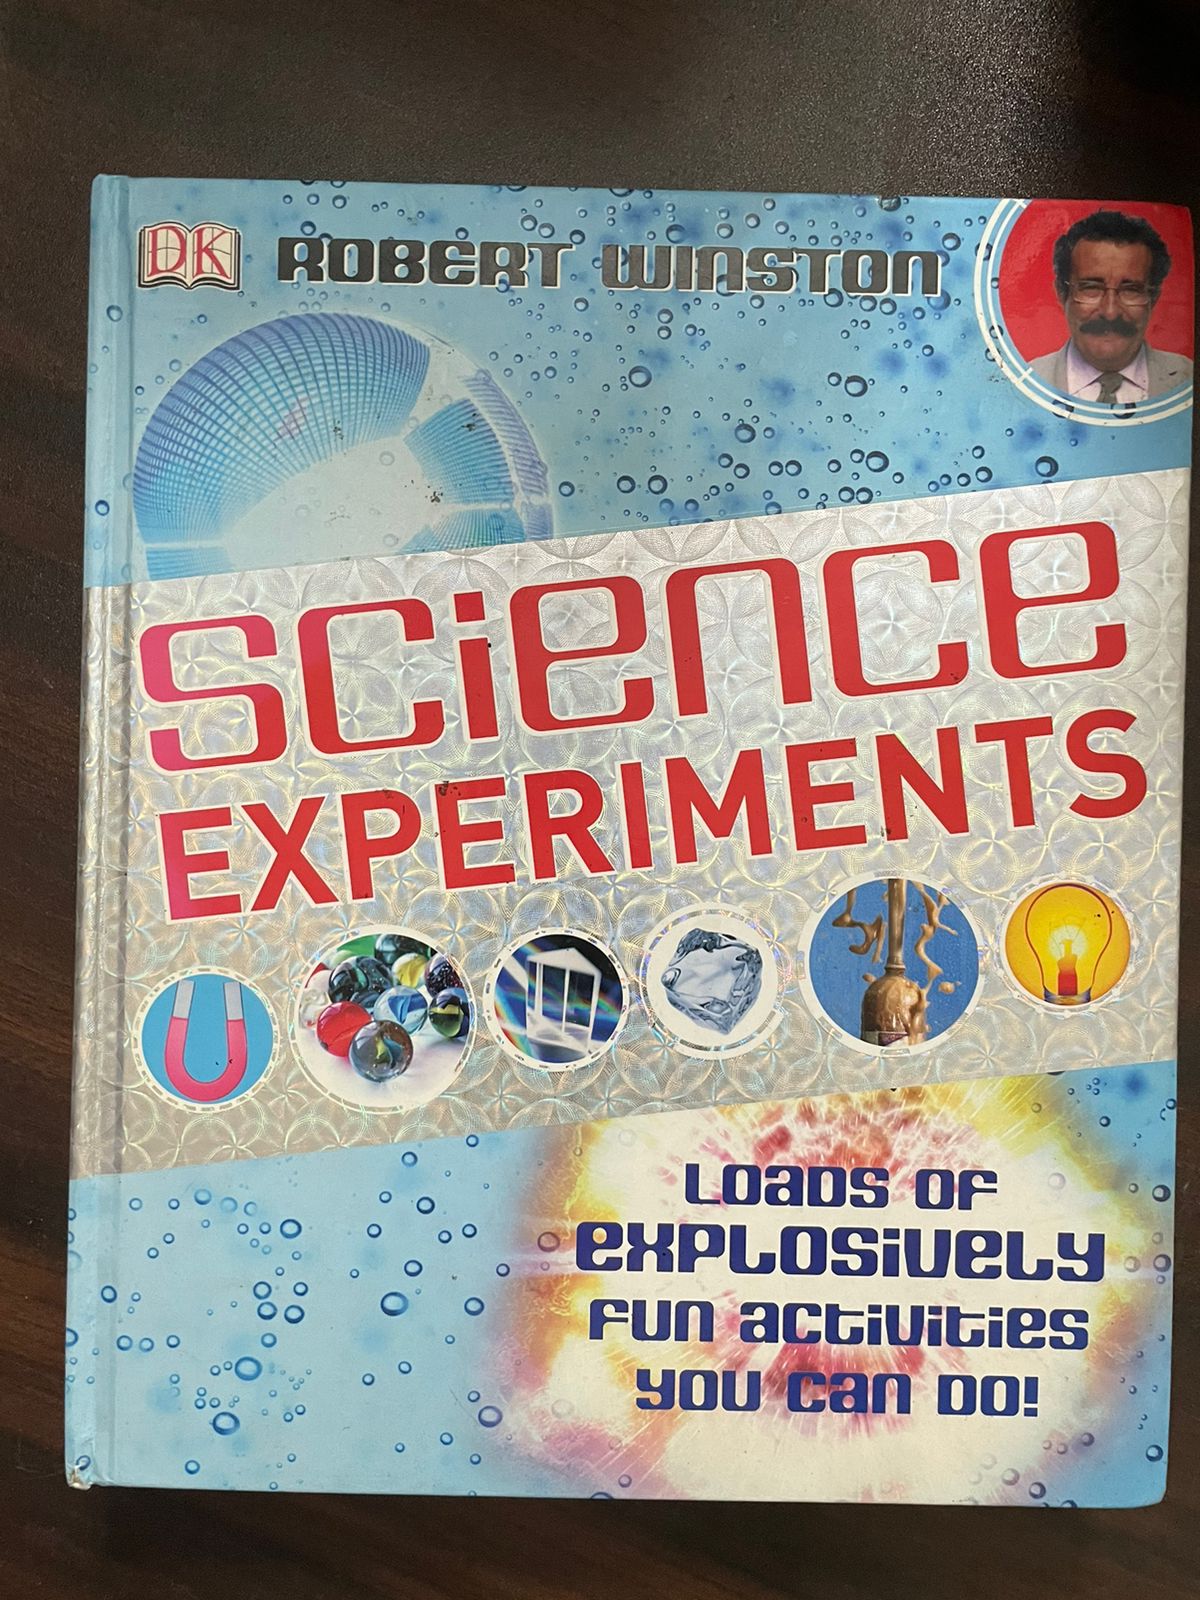 Activities　to　Loads　Explosively　Winston,　[Hardcover]　Science　Fun　do!　Experiments:　of　Robert